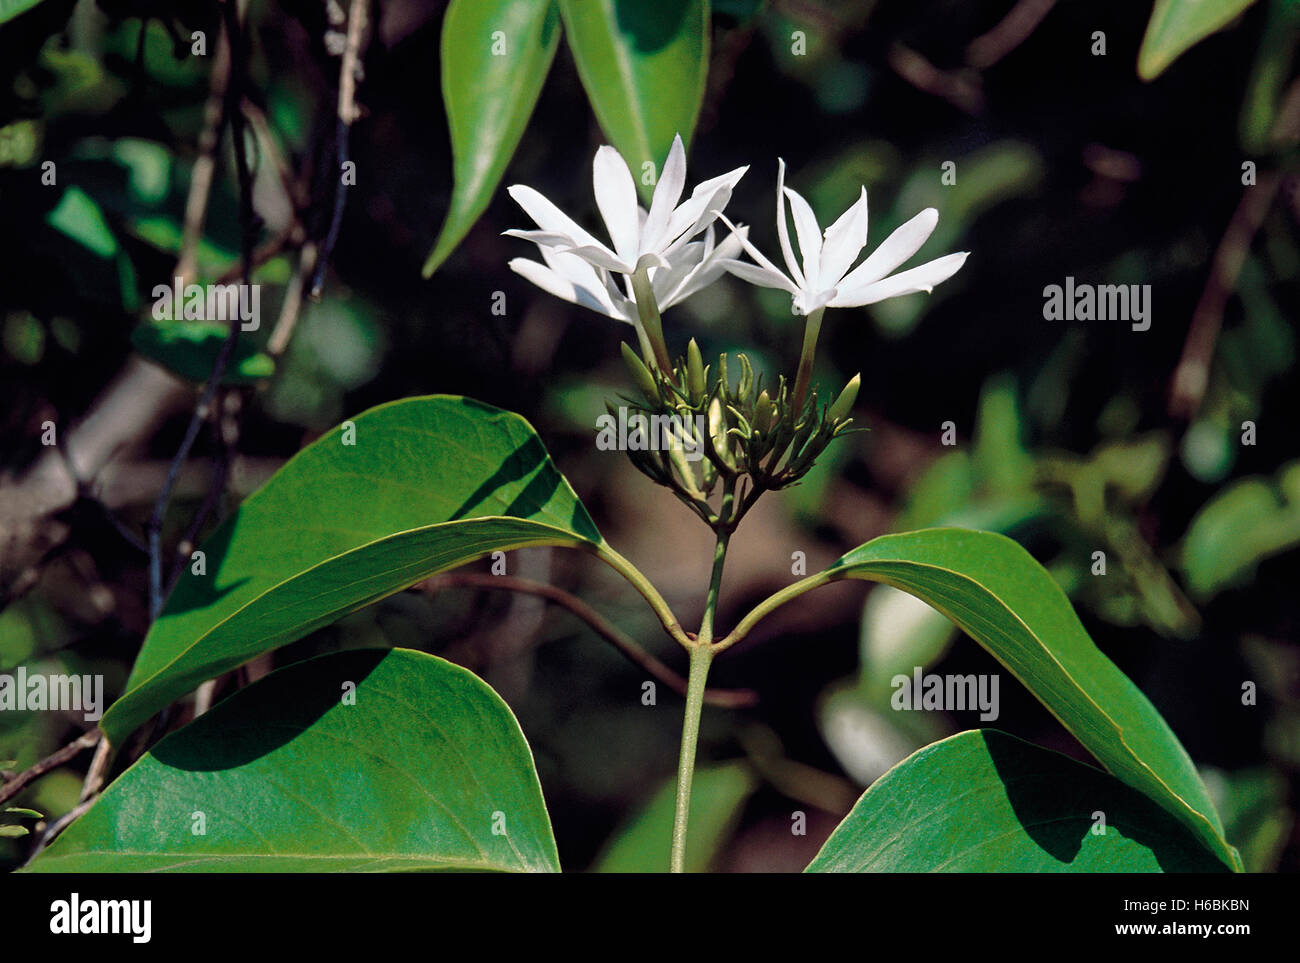 Jasminum Malabaricum. Family: Oleaceae. A large to medium-sized climber that grows wild along the Western Ghats in India. Stock Photo